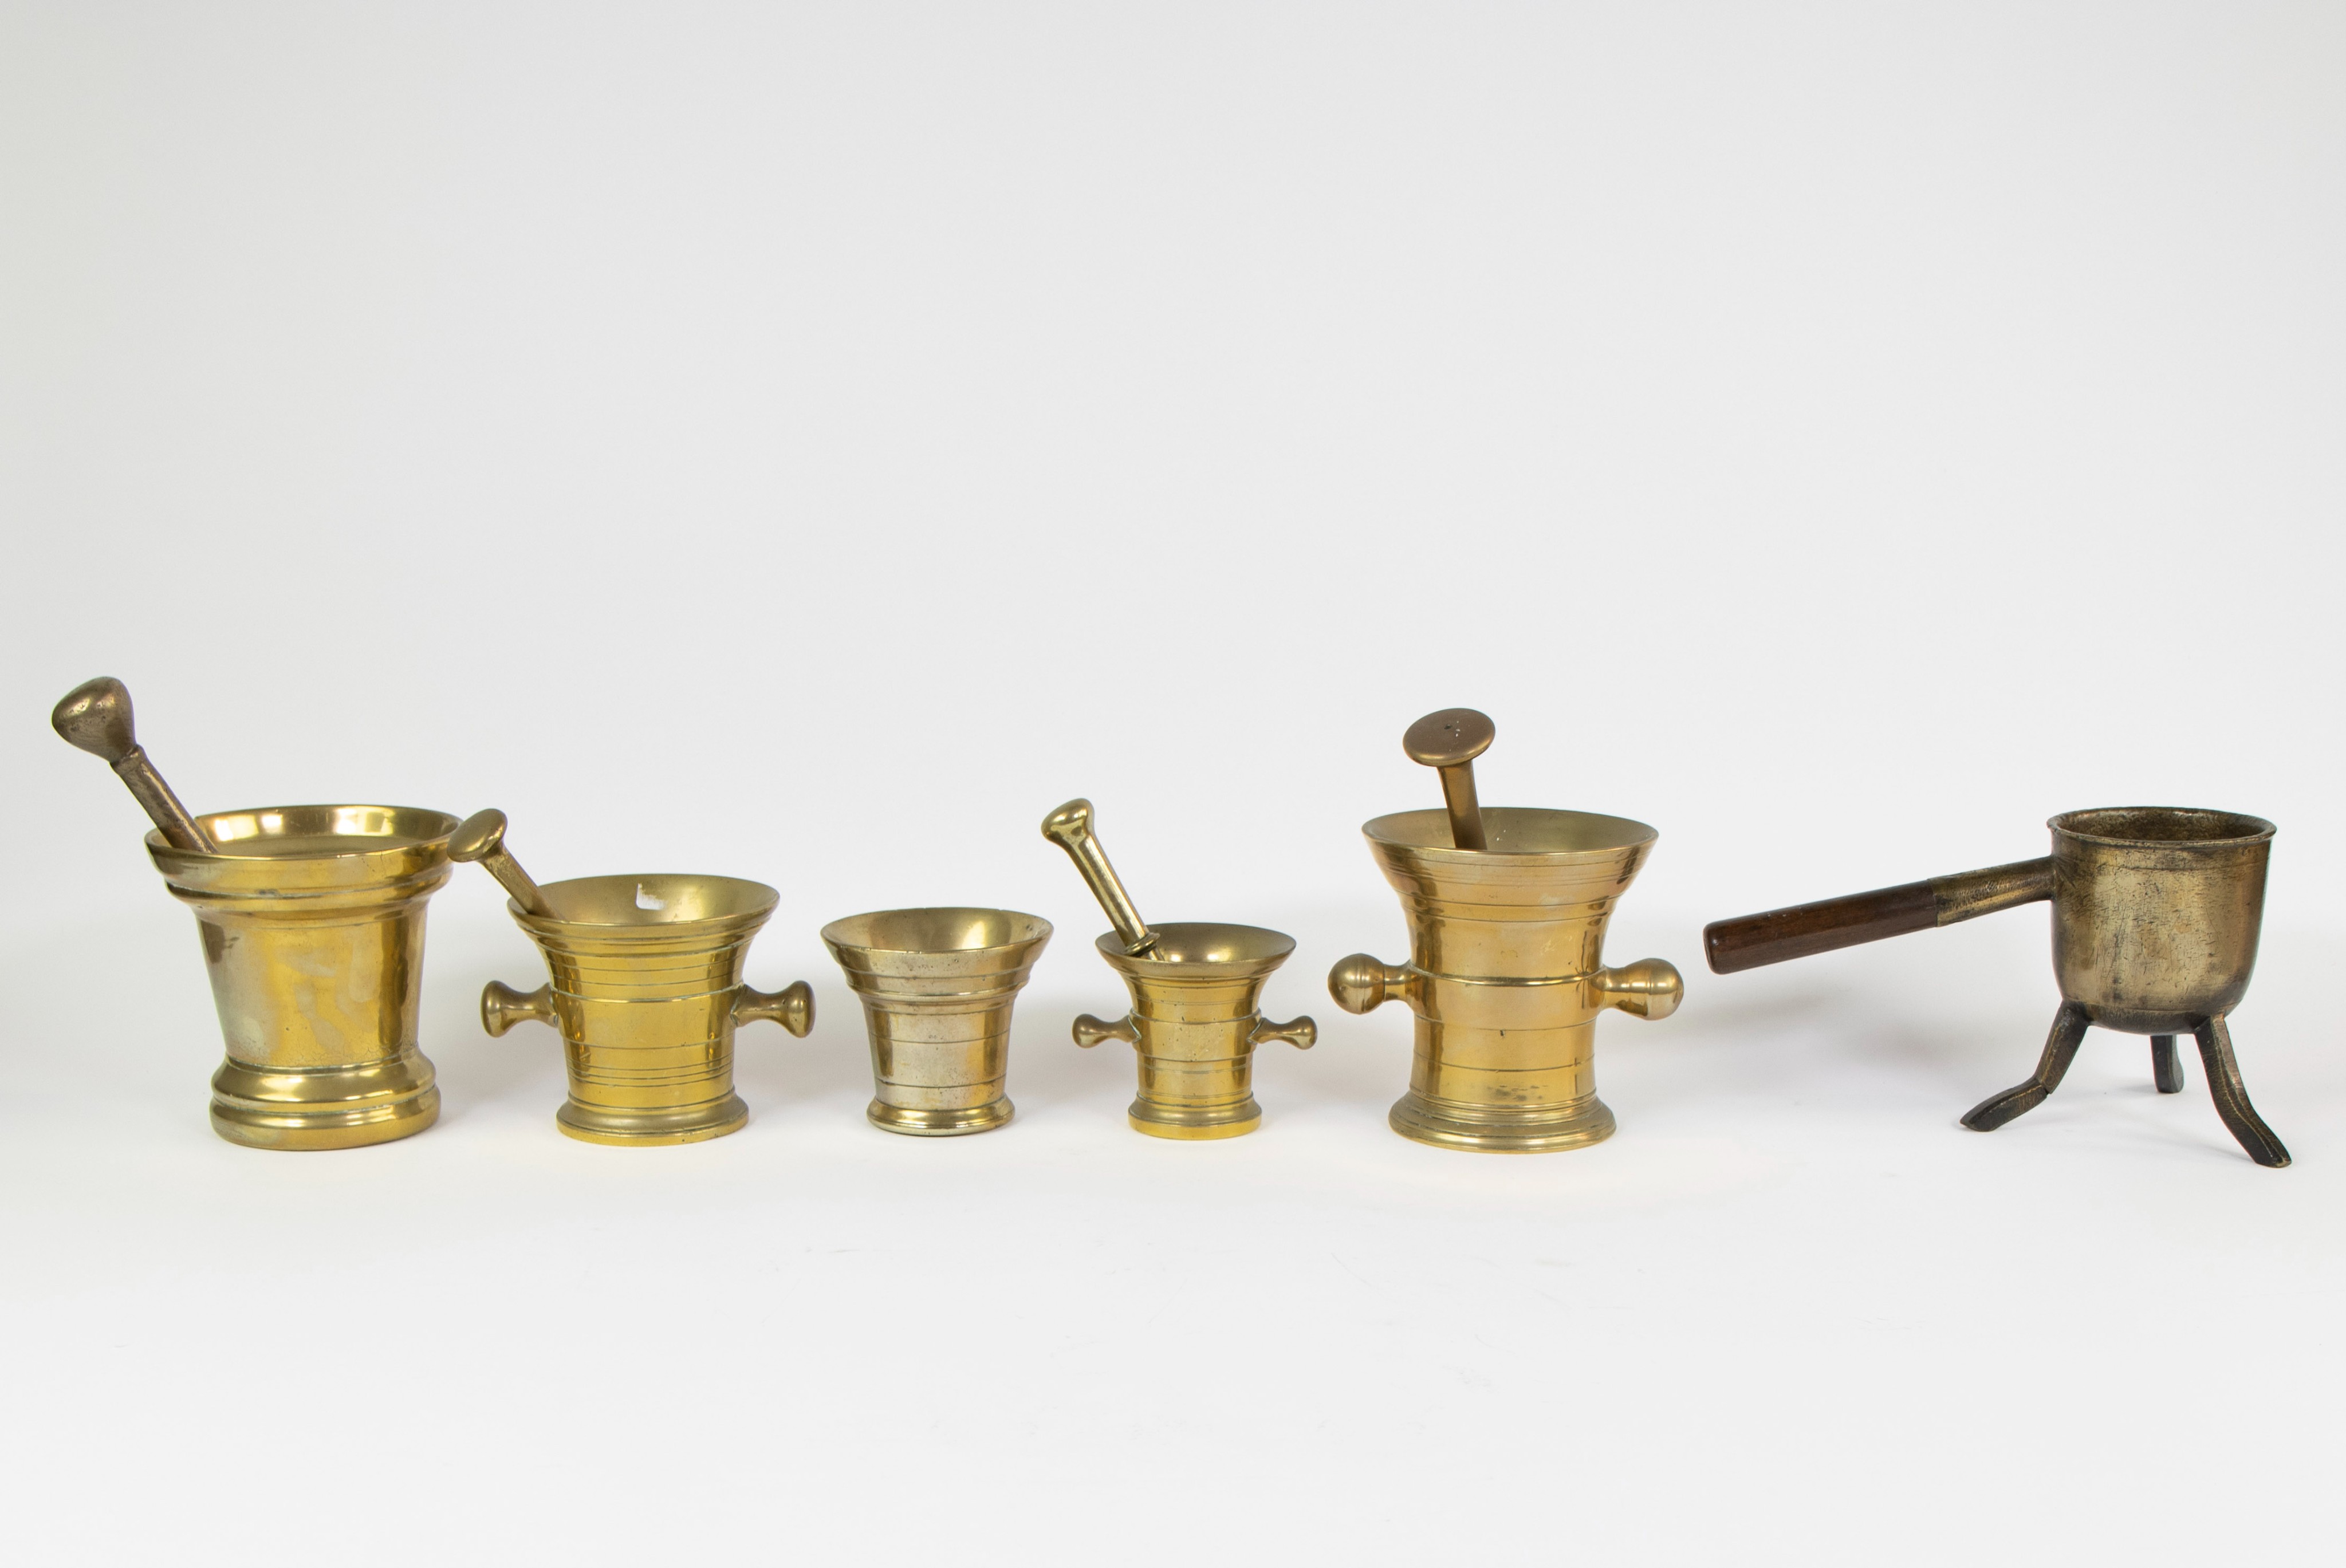 Collection of mortars, pestles and a melting pot - Image 3 of 6